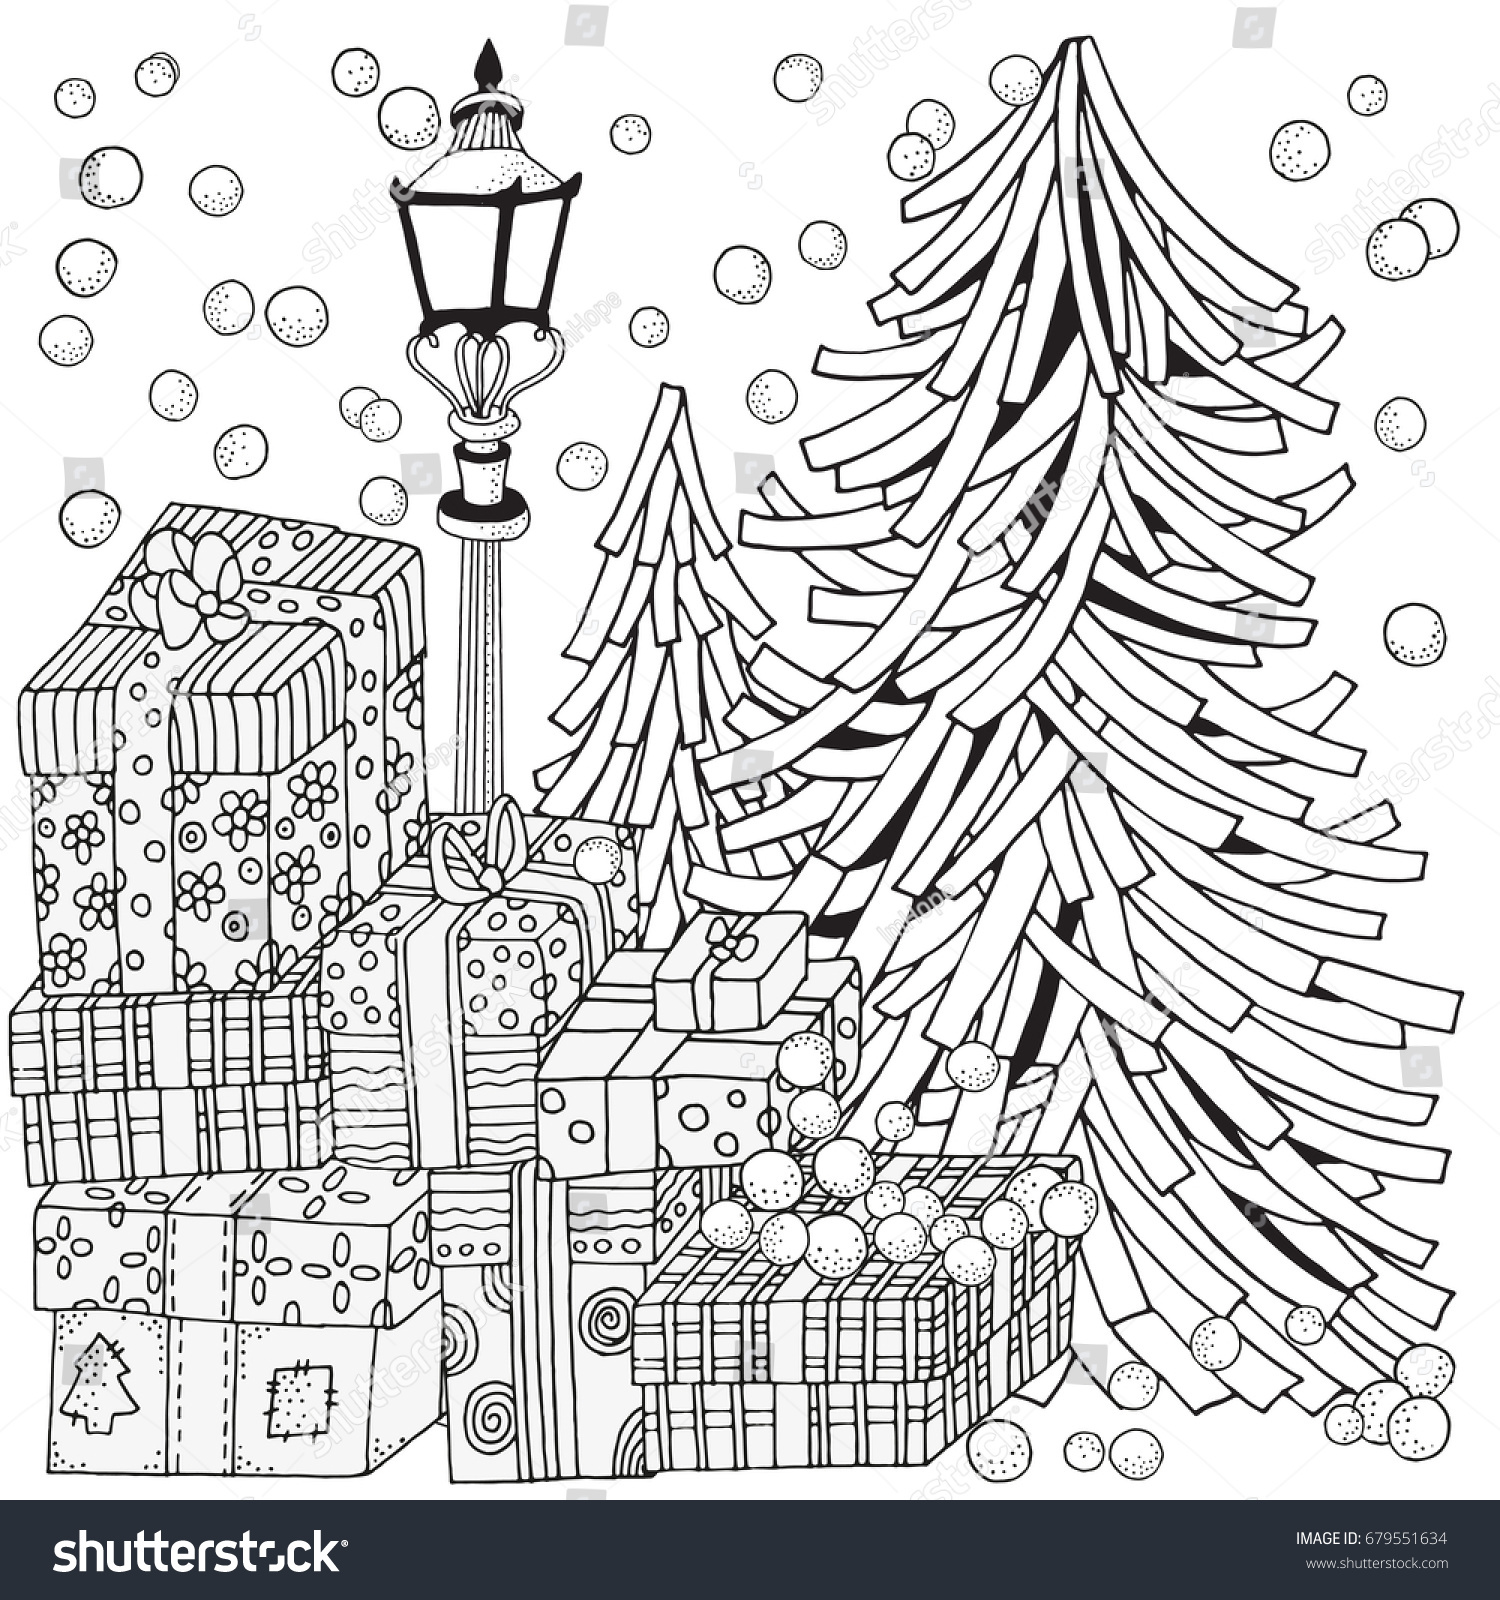 Winter Adult Coloring Book Page Lantern Stock Vector Royalty Free ...